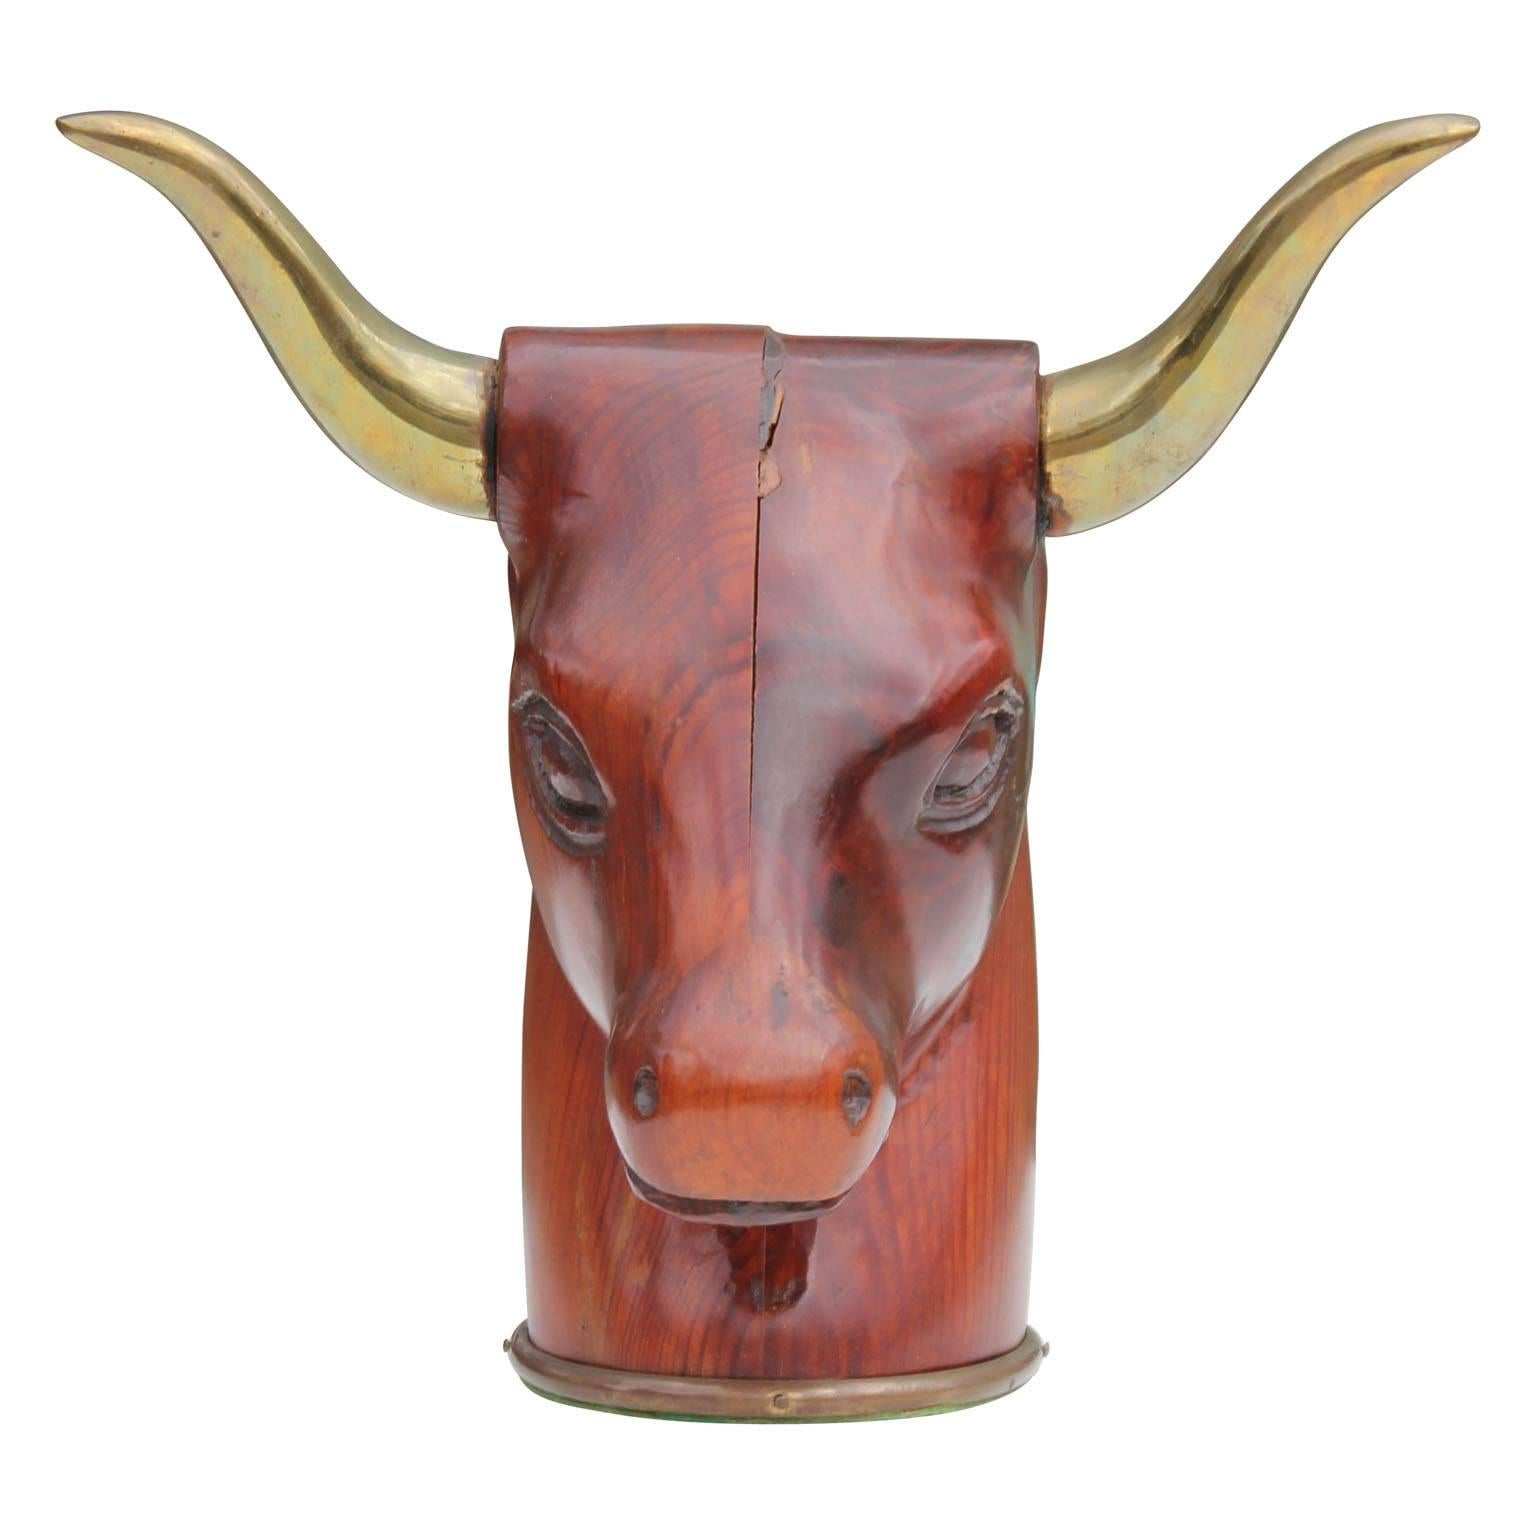 Unique wood and brass Sarreid bull head sculpture. Perfect statement piece to any room.